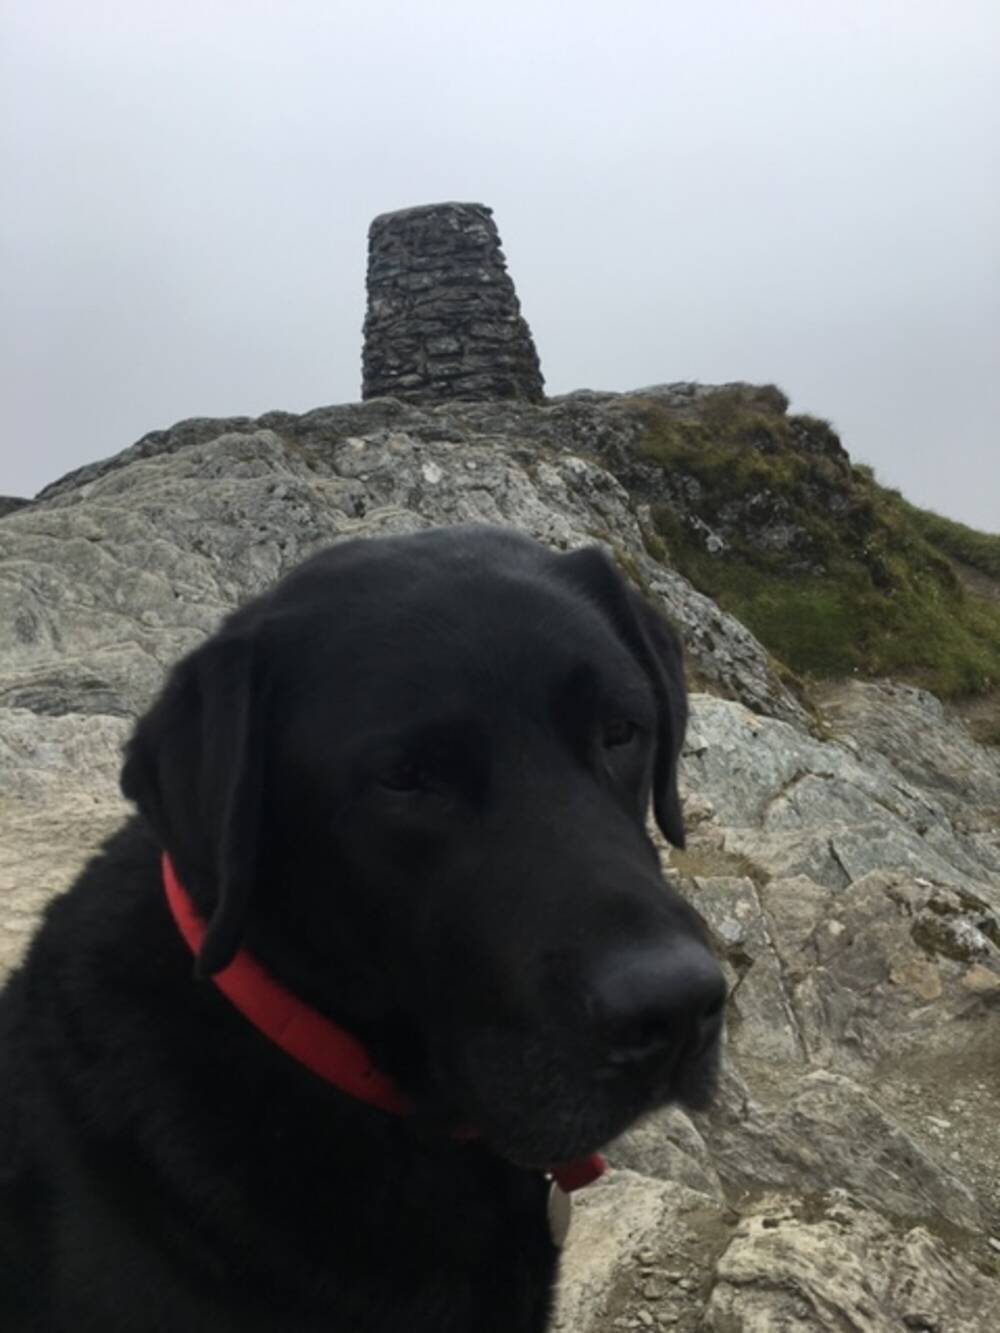 Head and shoulders of a black dog with a red collar near the top of a hill at Ben Lawers with a cairn in the background.